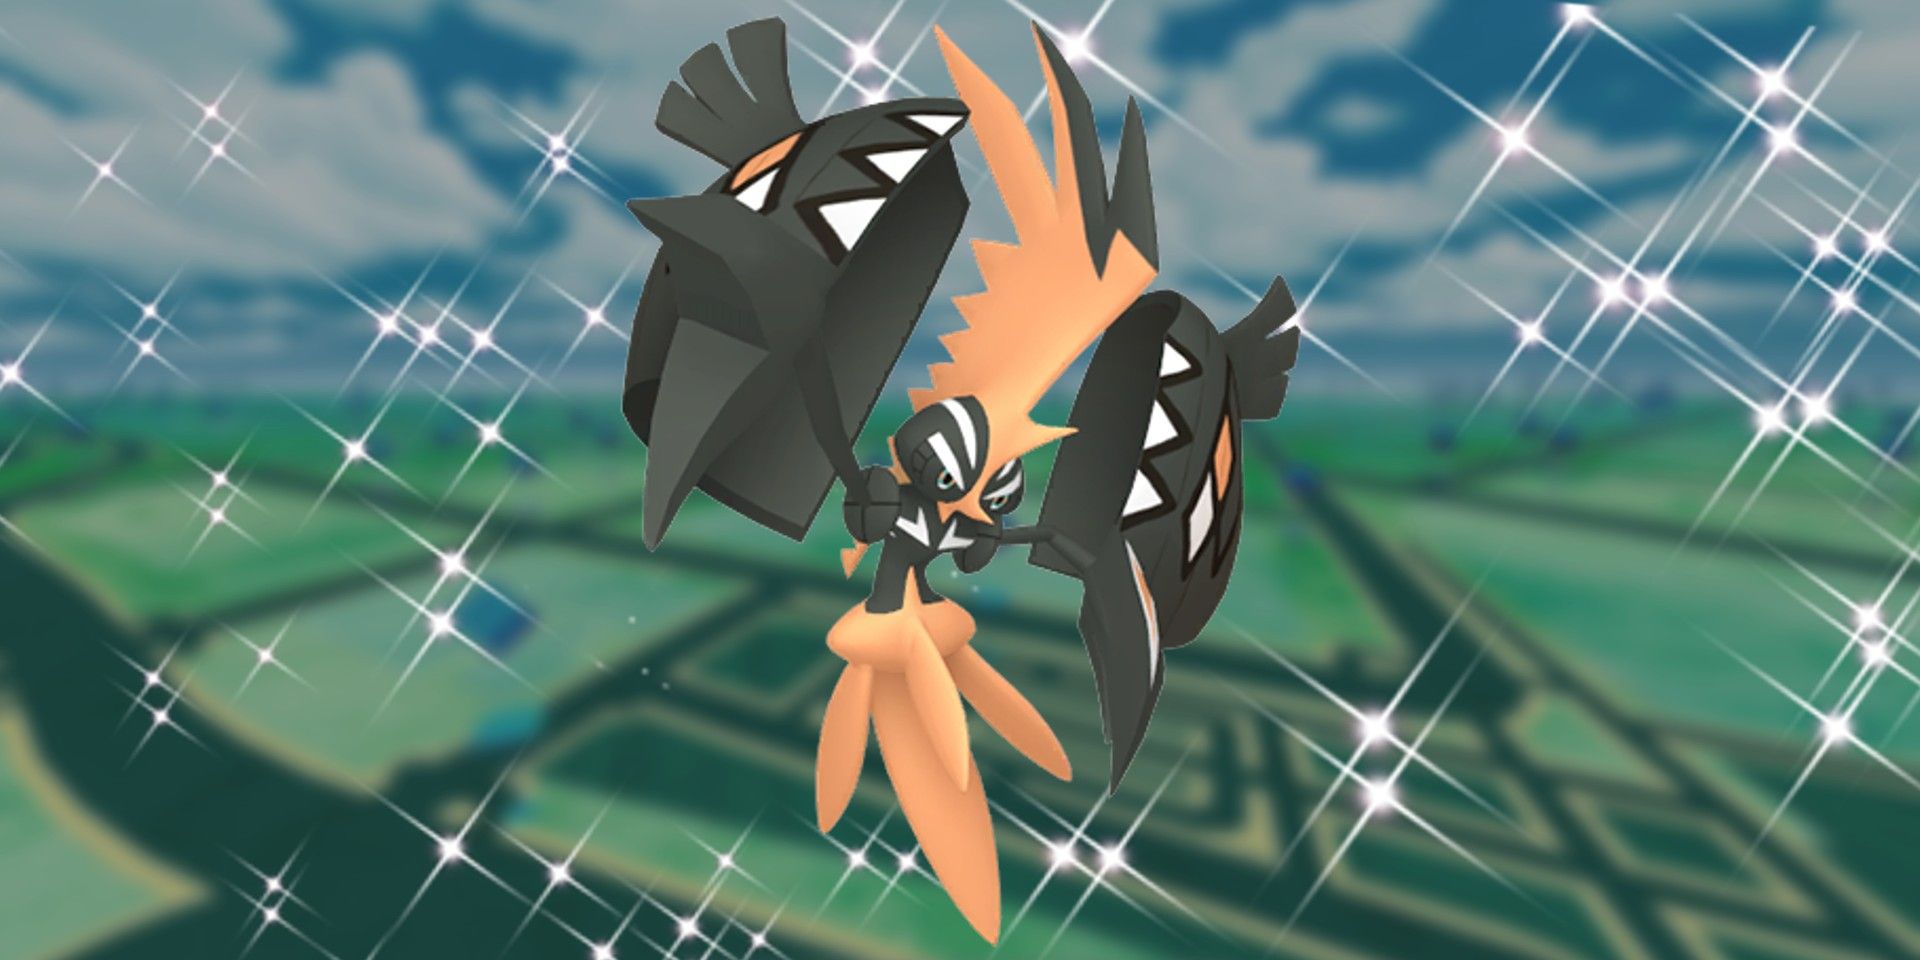 A Shiny Tapu Koko with sparkles behind it and a blurred image of the Pokémon GO card.